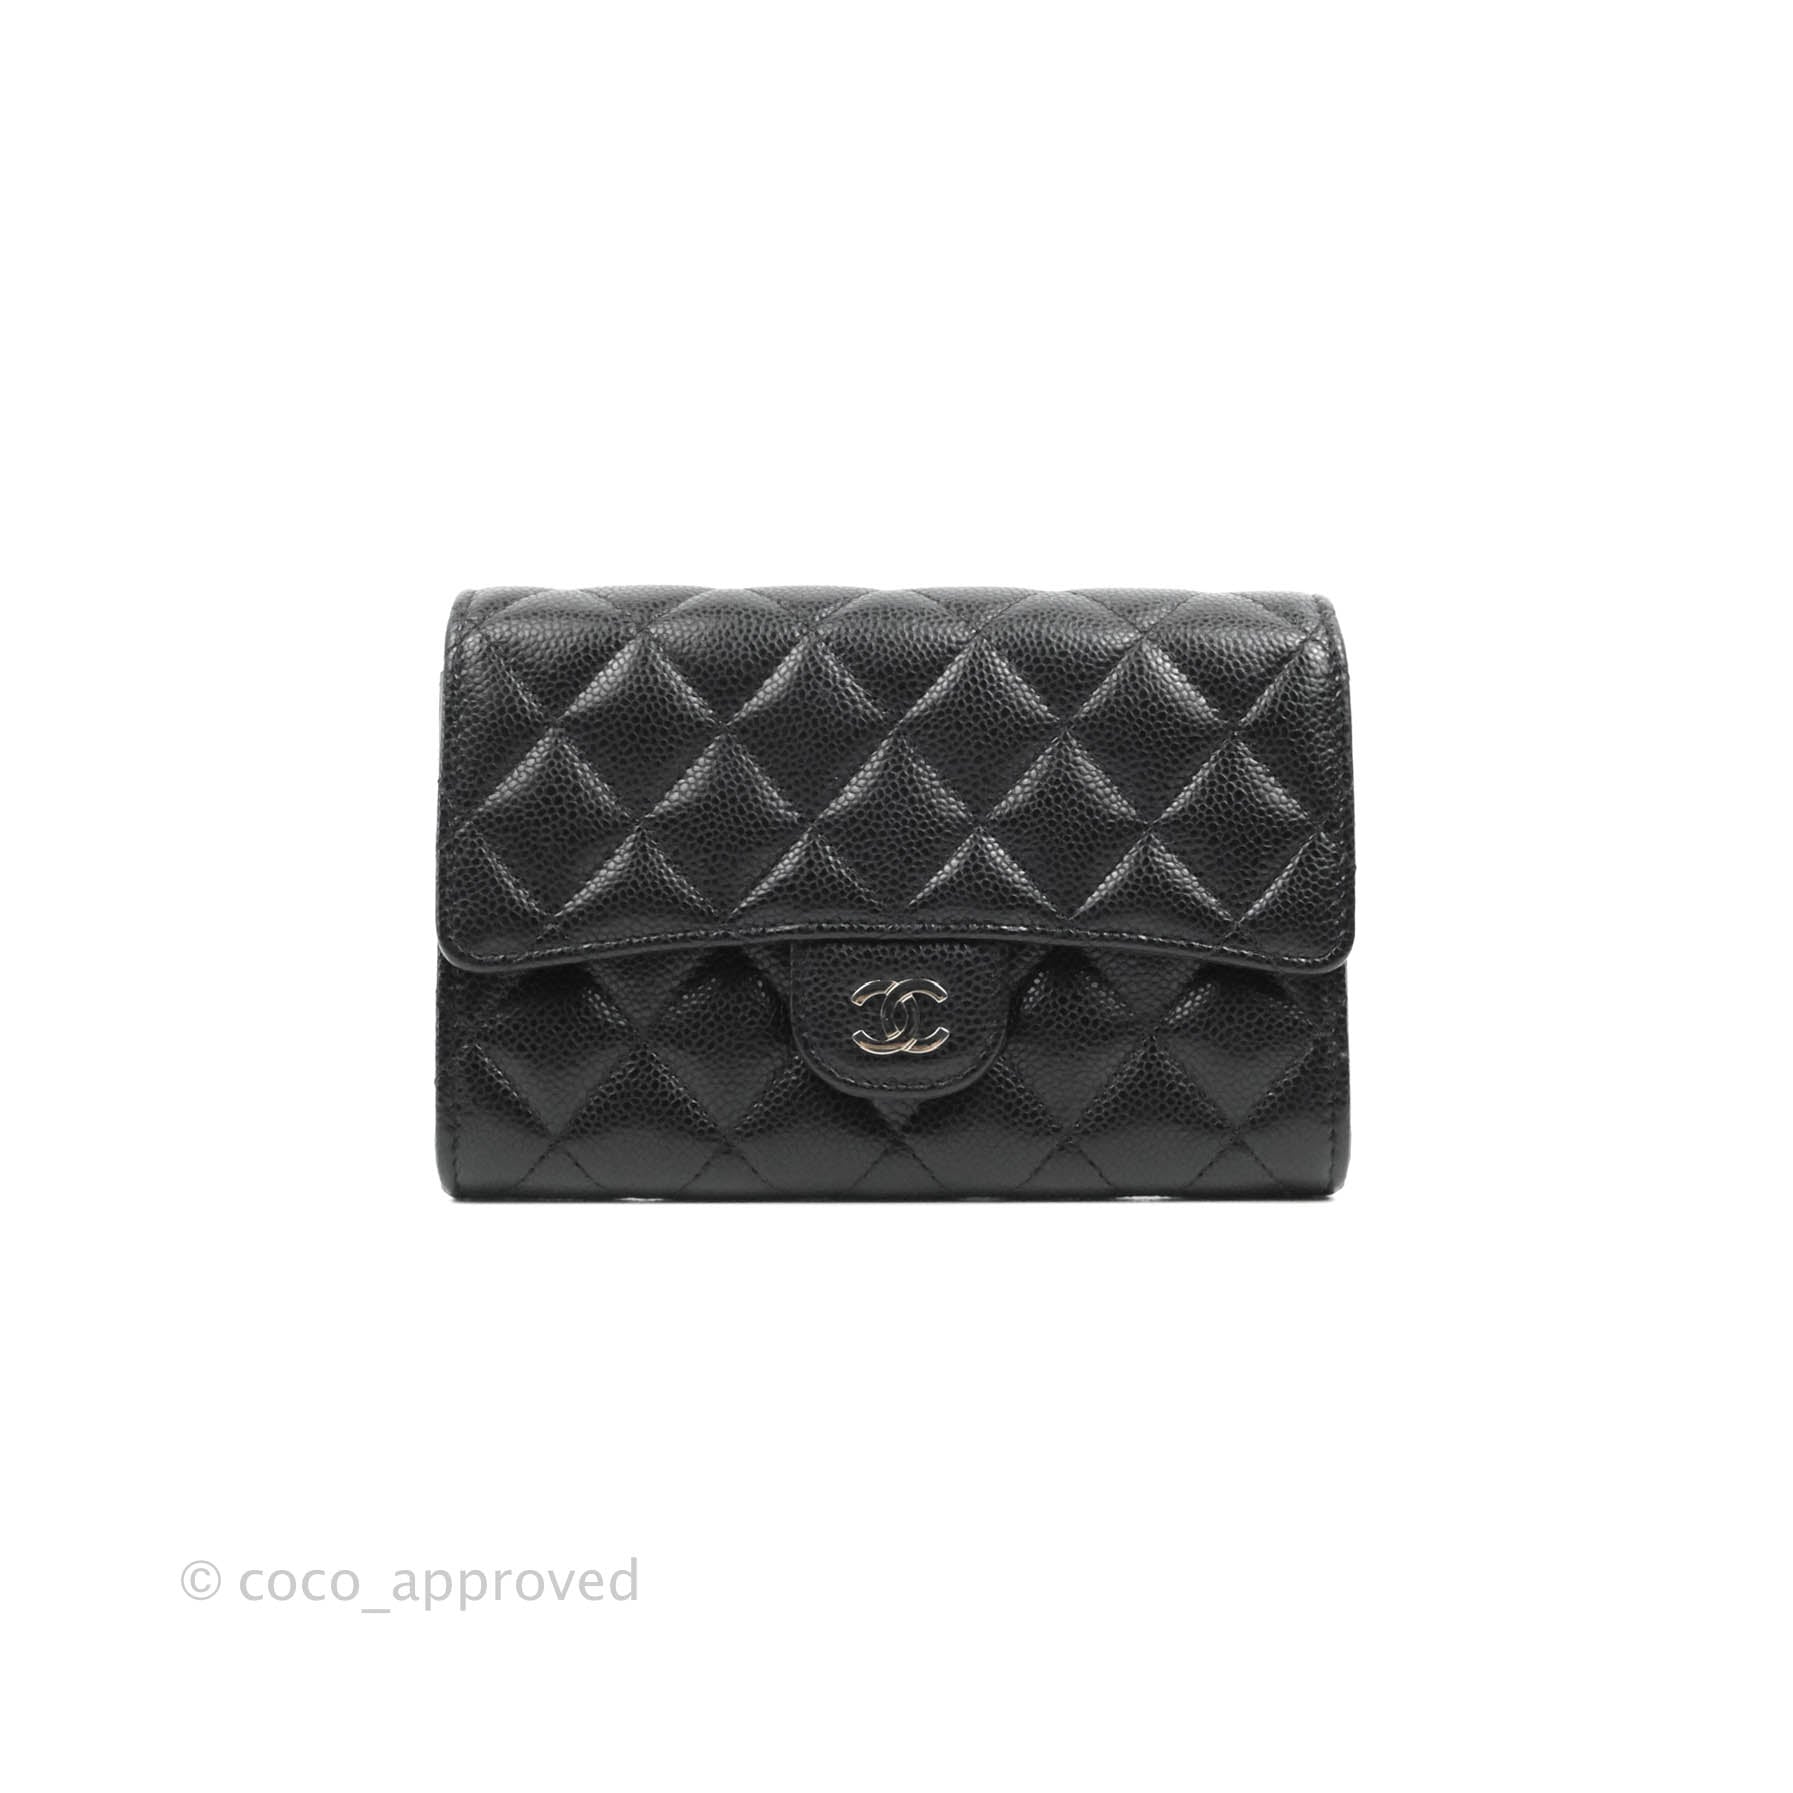 chanel leather deauville tote bag